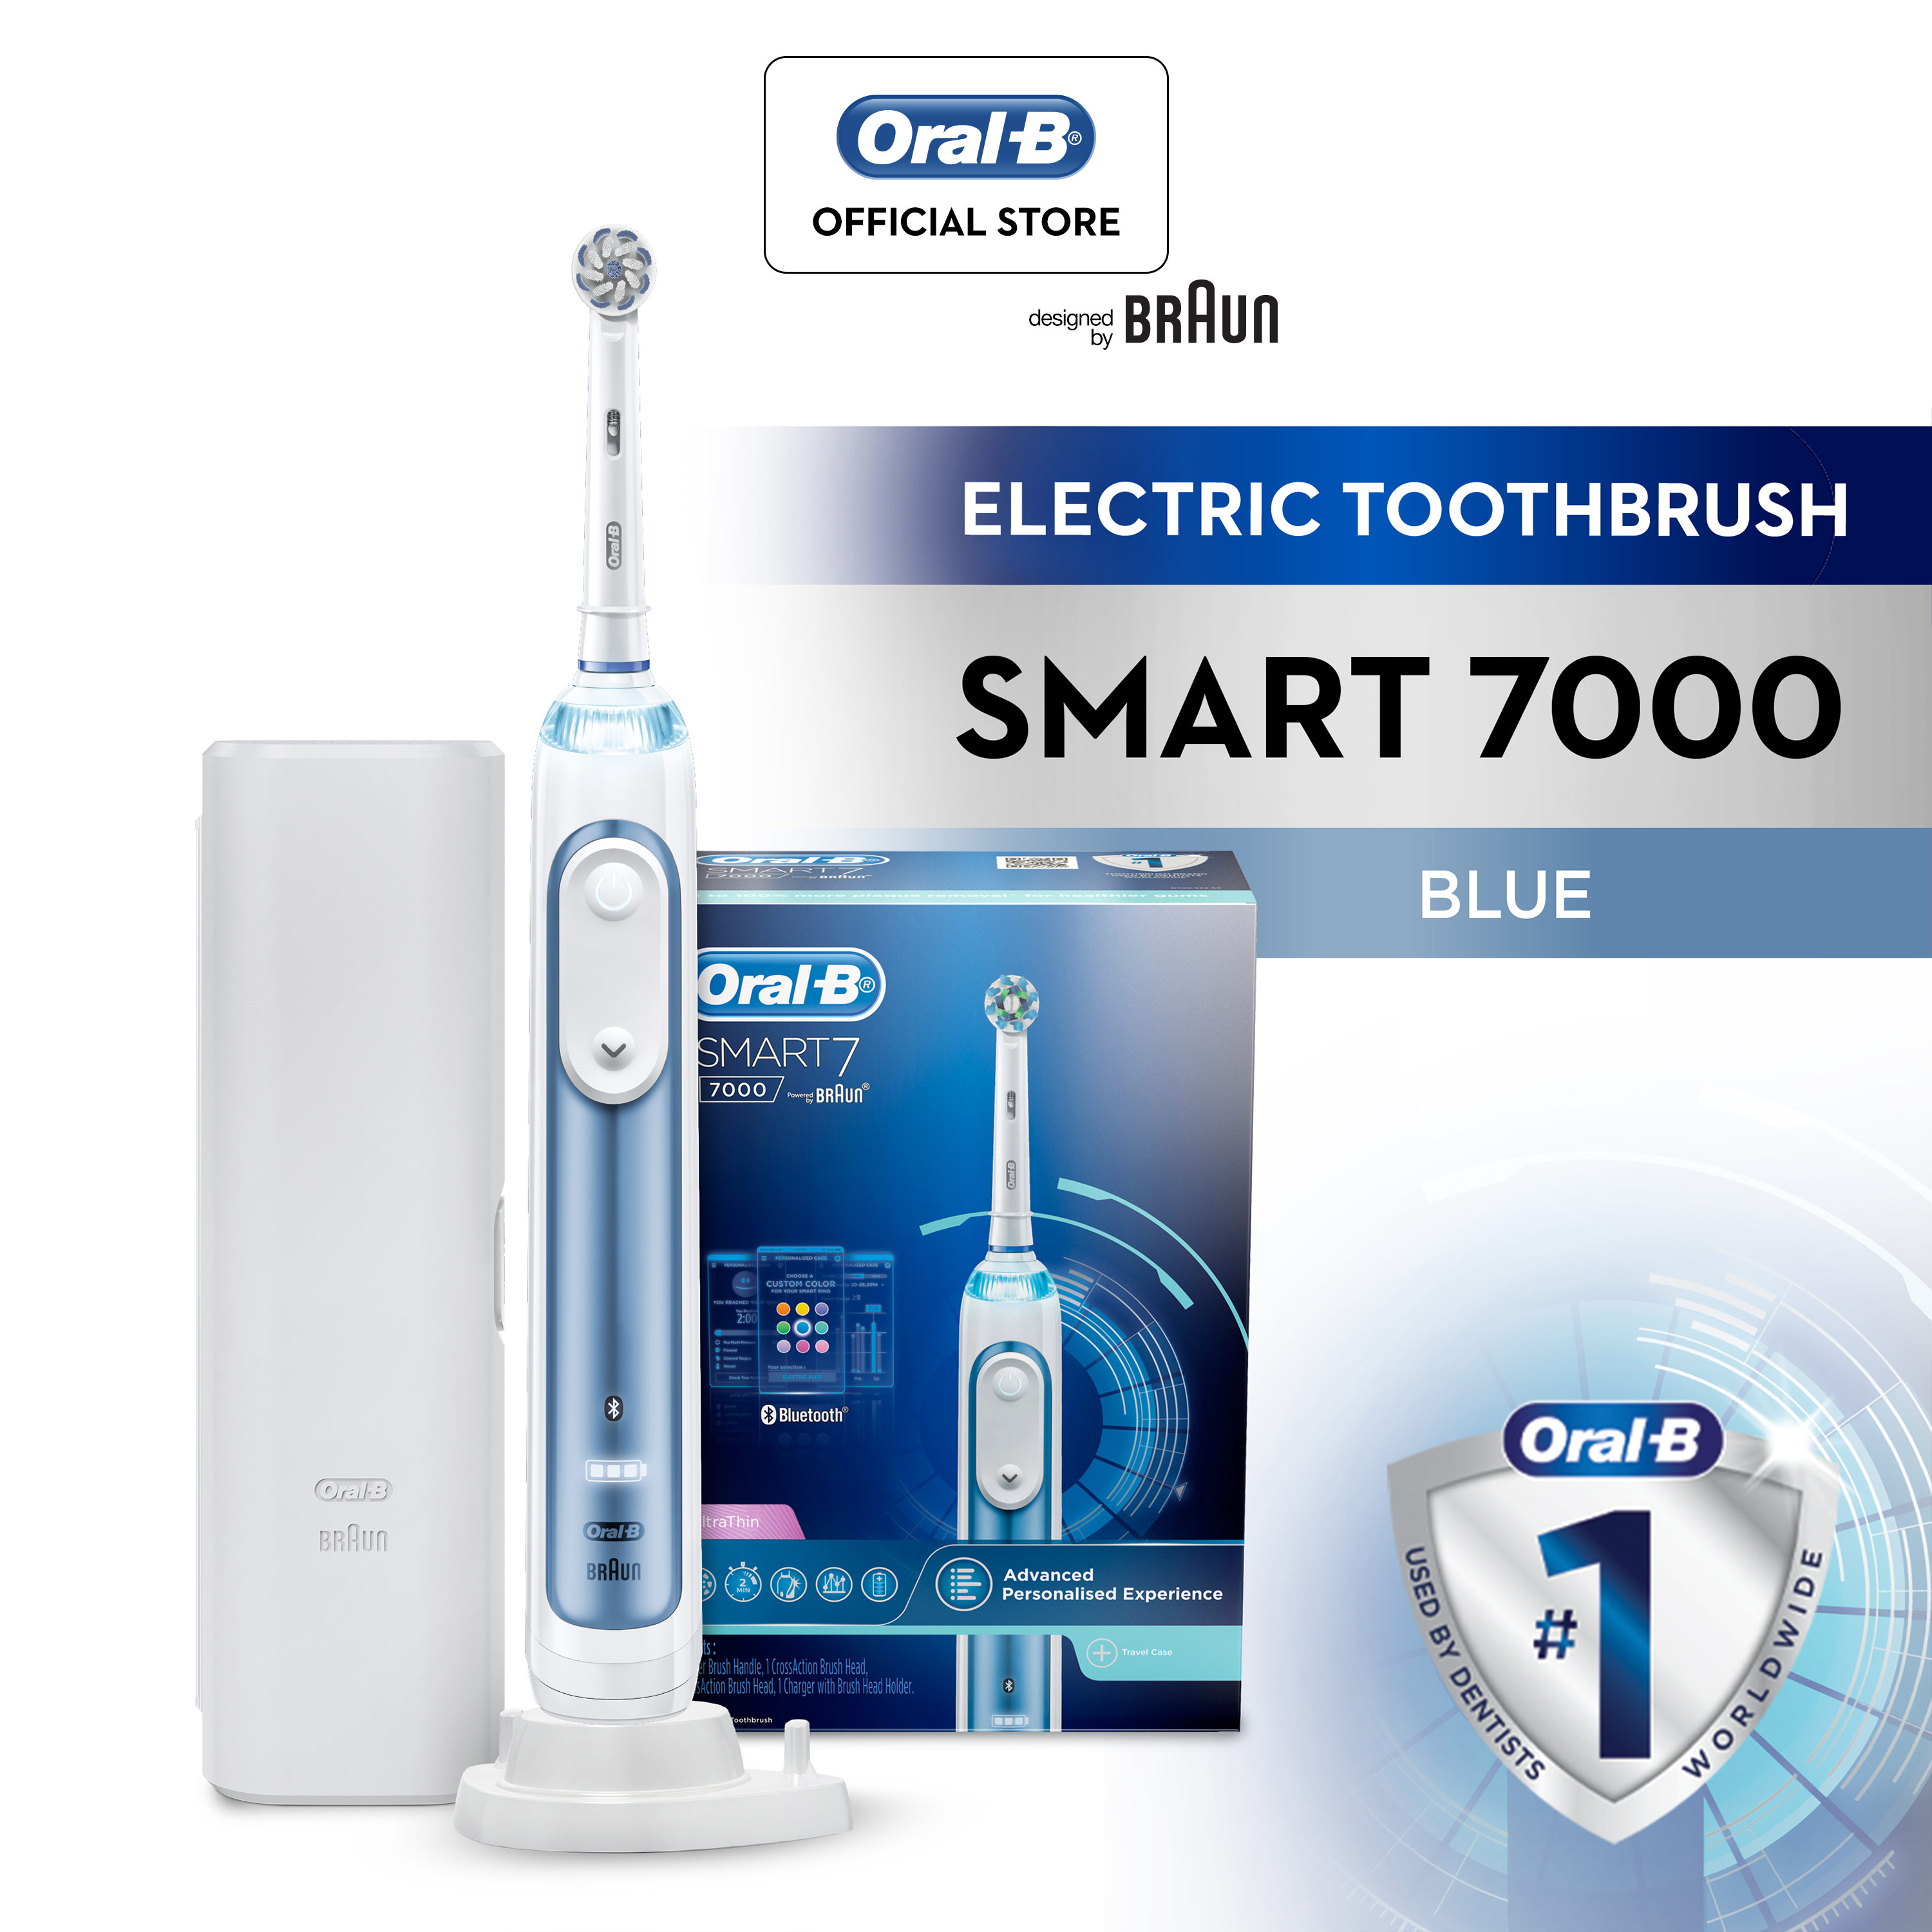 Soepel Bedankt openbaar Oral-B Smart 7 7000 Electric Rechargeable Toothbrush Bluetooth Connectivity  Powered by Braun with Li-Ion Battery | Lazada Singapore